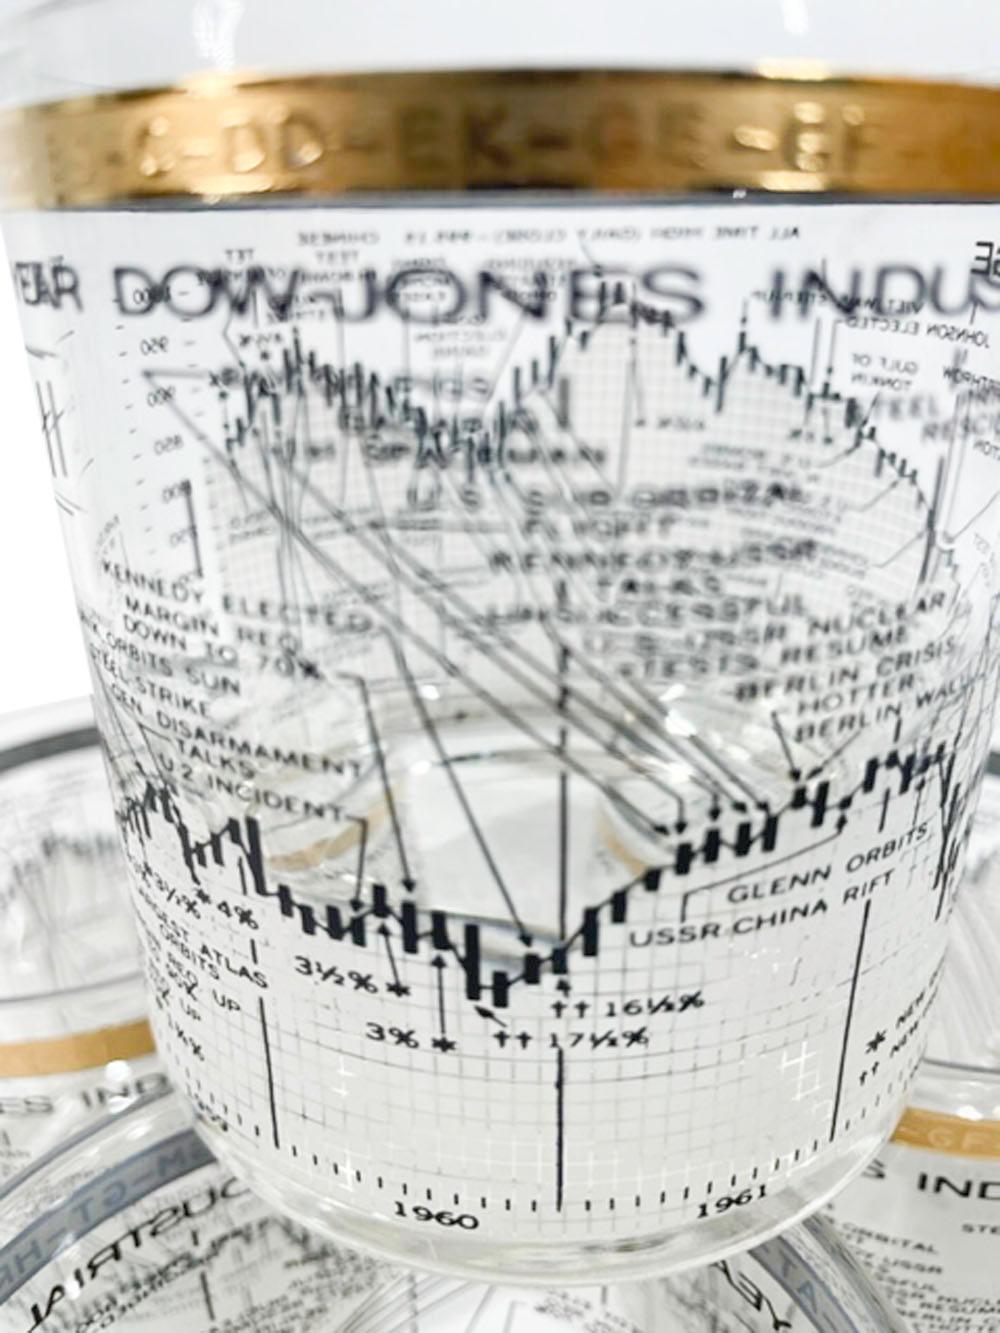 Set of four Ten Year Dow-Jones Industrial Average rocks glasses for the period 1958-1968 with a black and white enamel graph of the market's activity along with events that effected the changes, below a 22k gold band embossed with stock symbols.